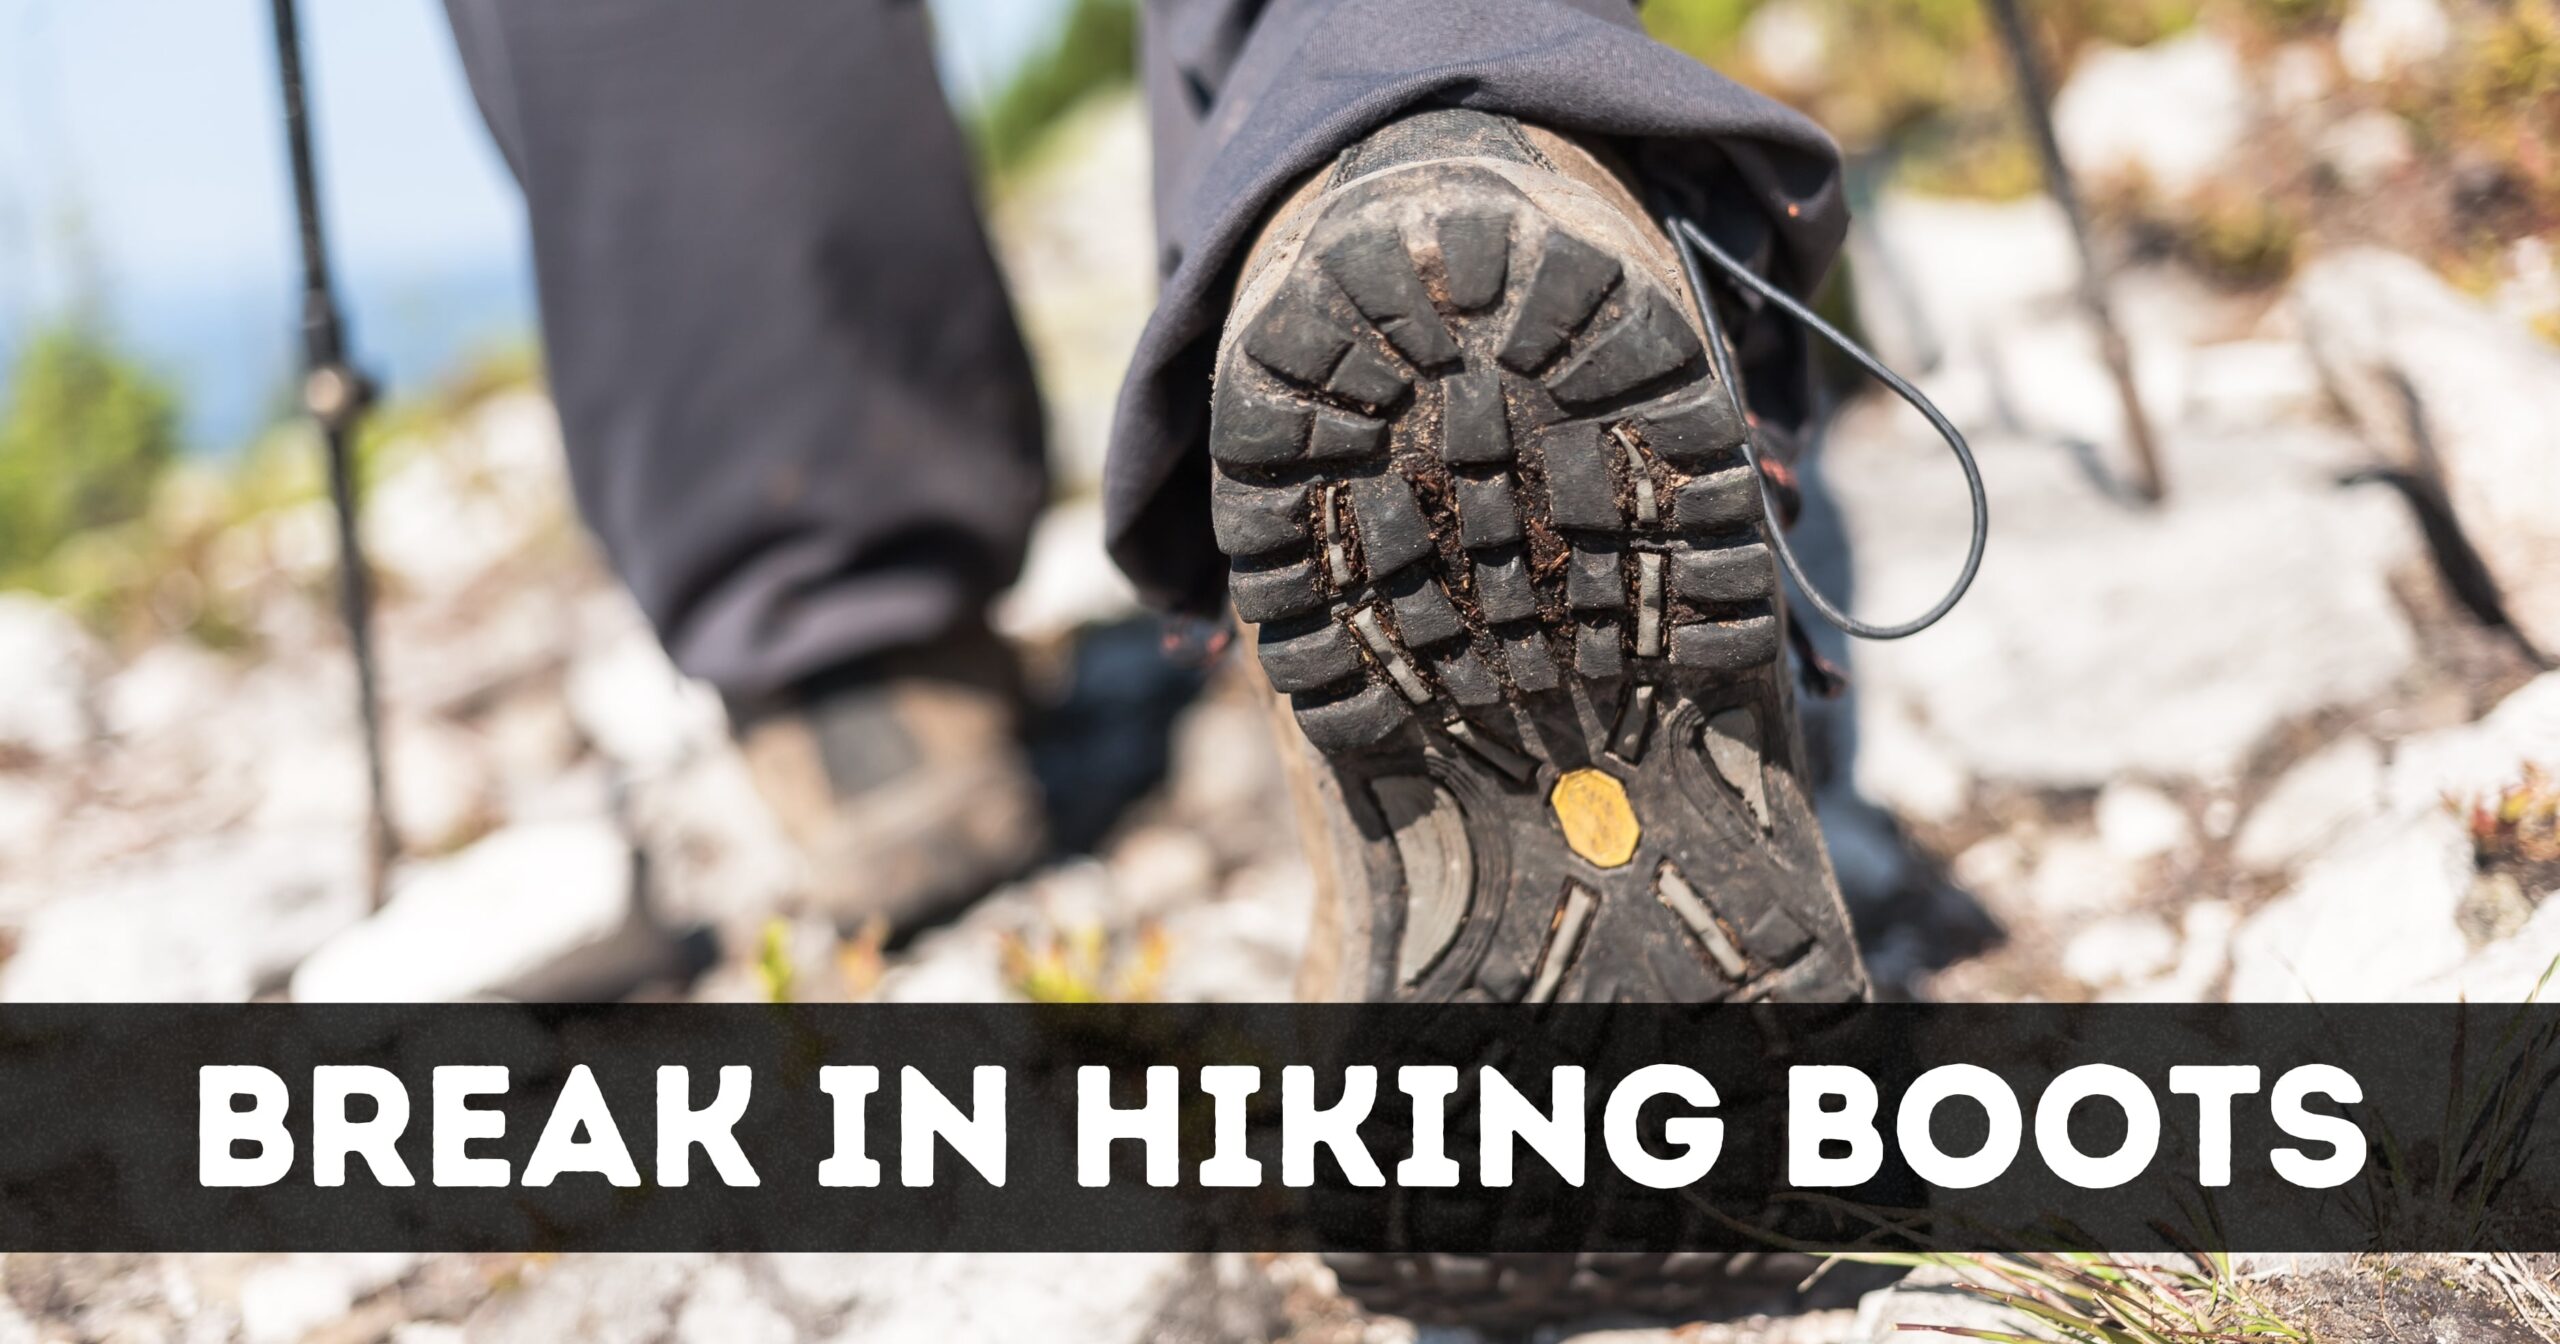 How Many Miles To Break In Hiking Boots